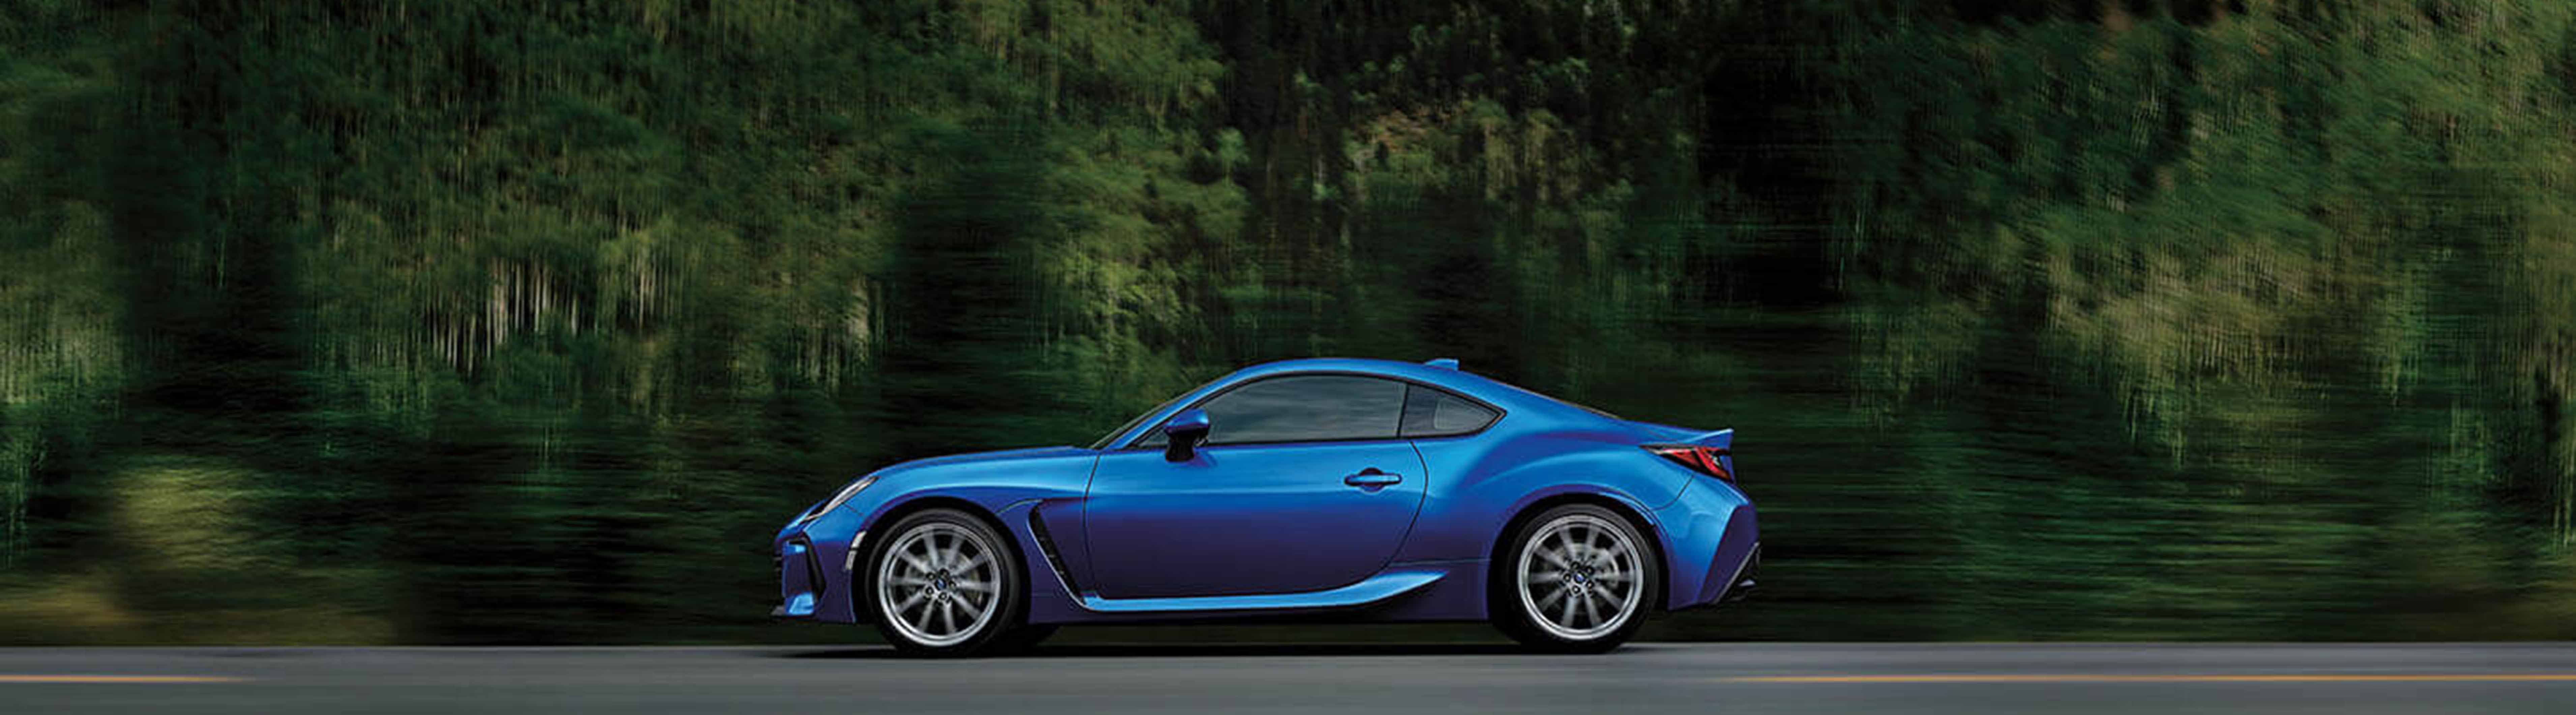 All-new Subaru BRZ crowned 2022 Motor Sports Car of the Year